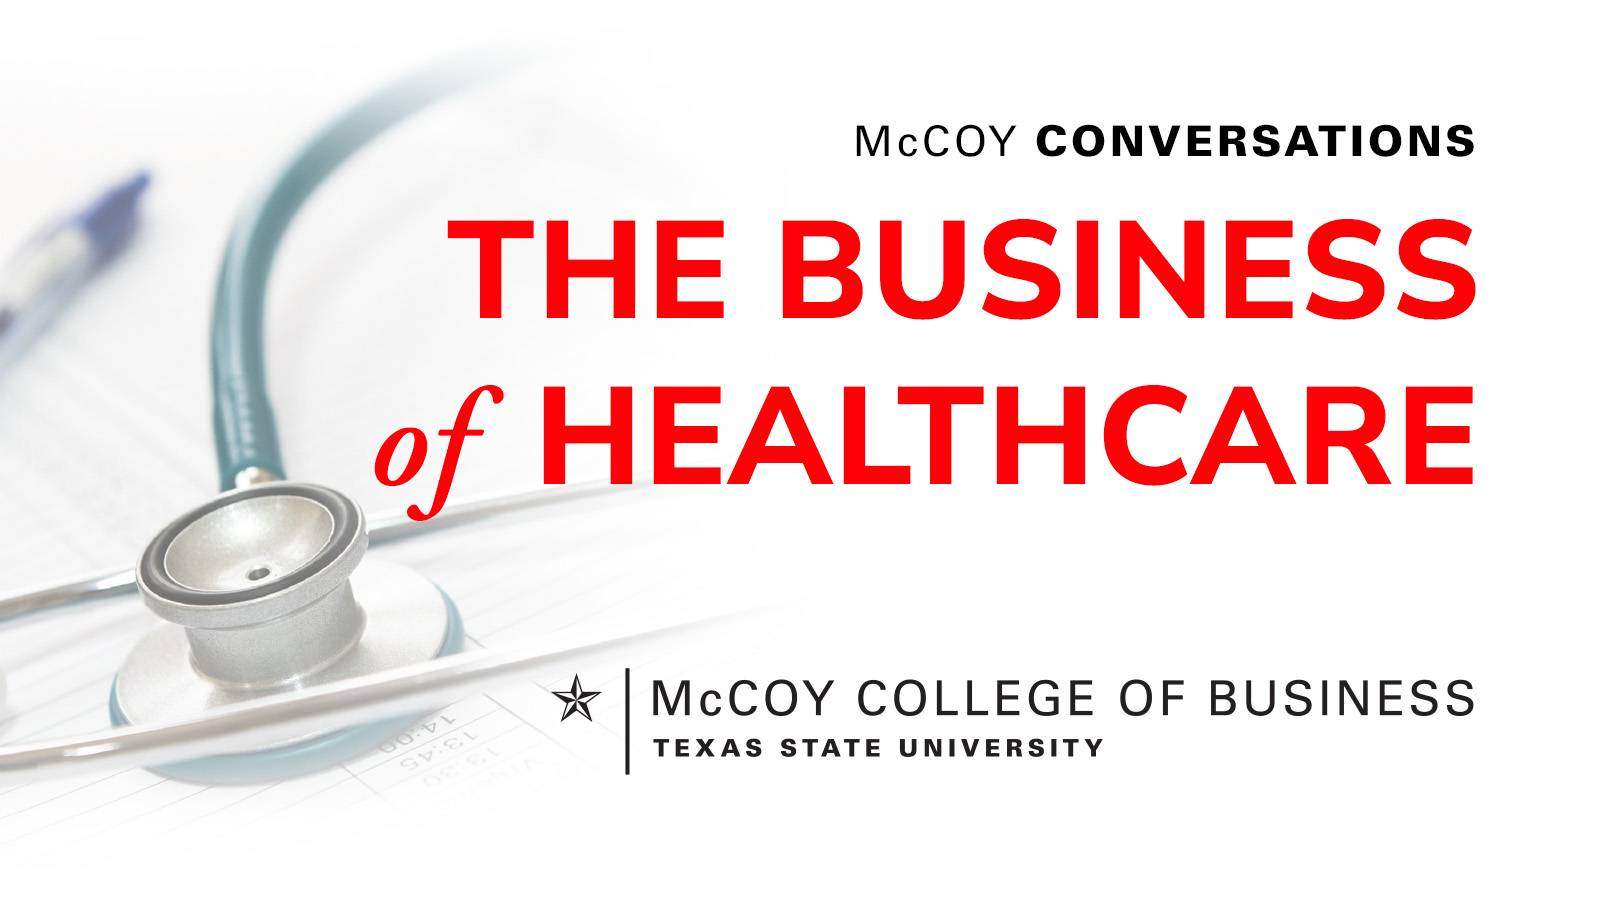 White graphic with stethoscope and text: "McCoy Conversations, The Business of Healthcare"